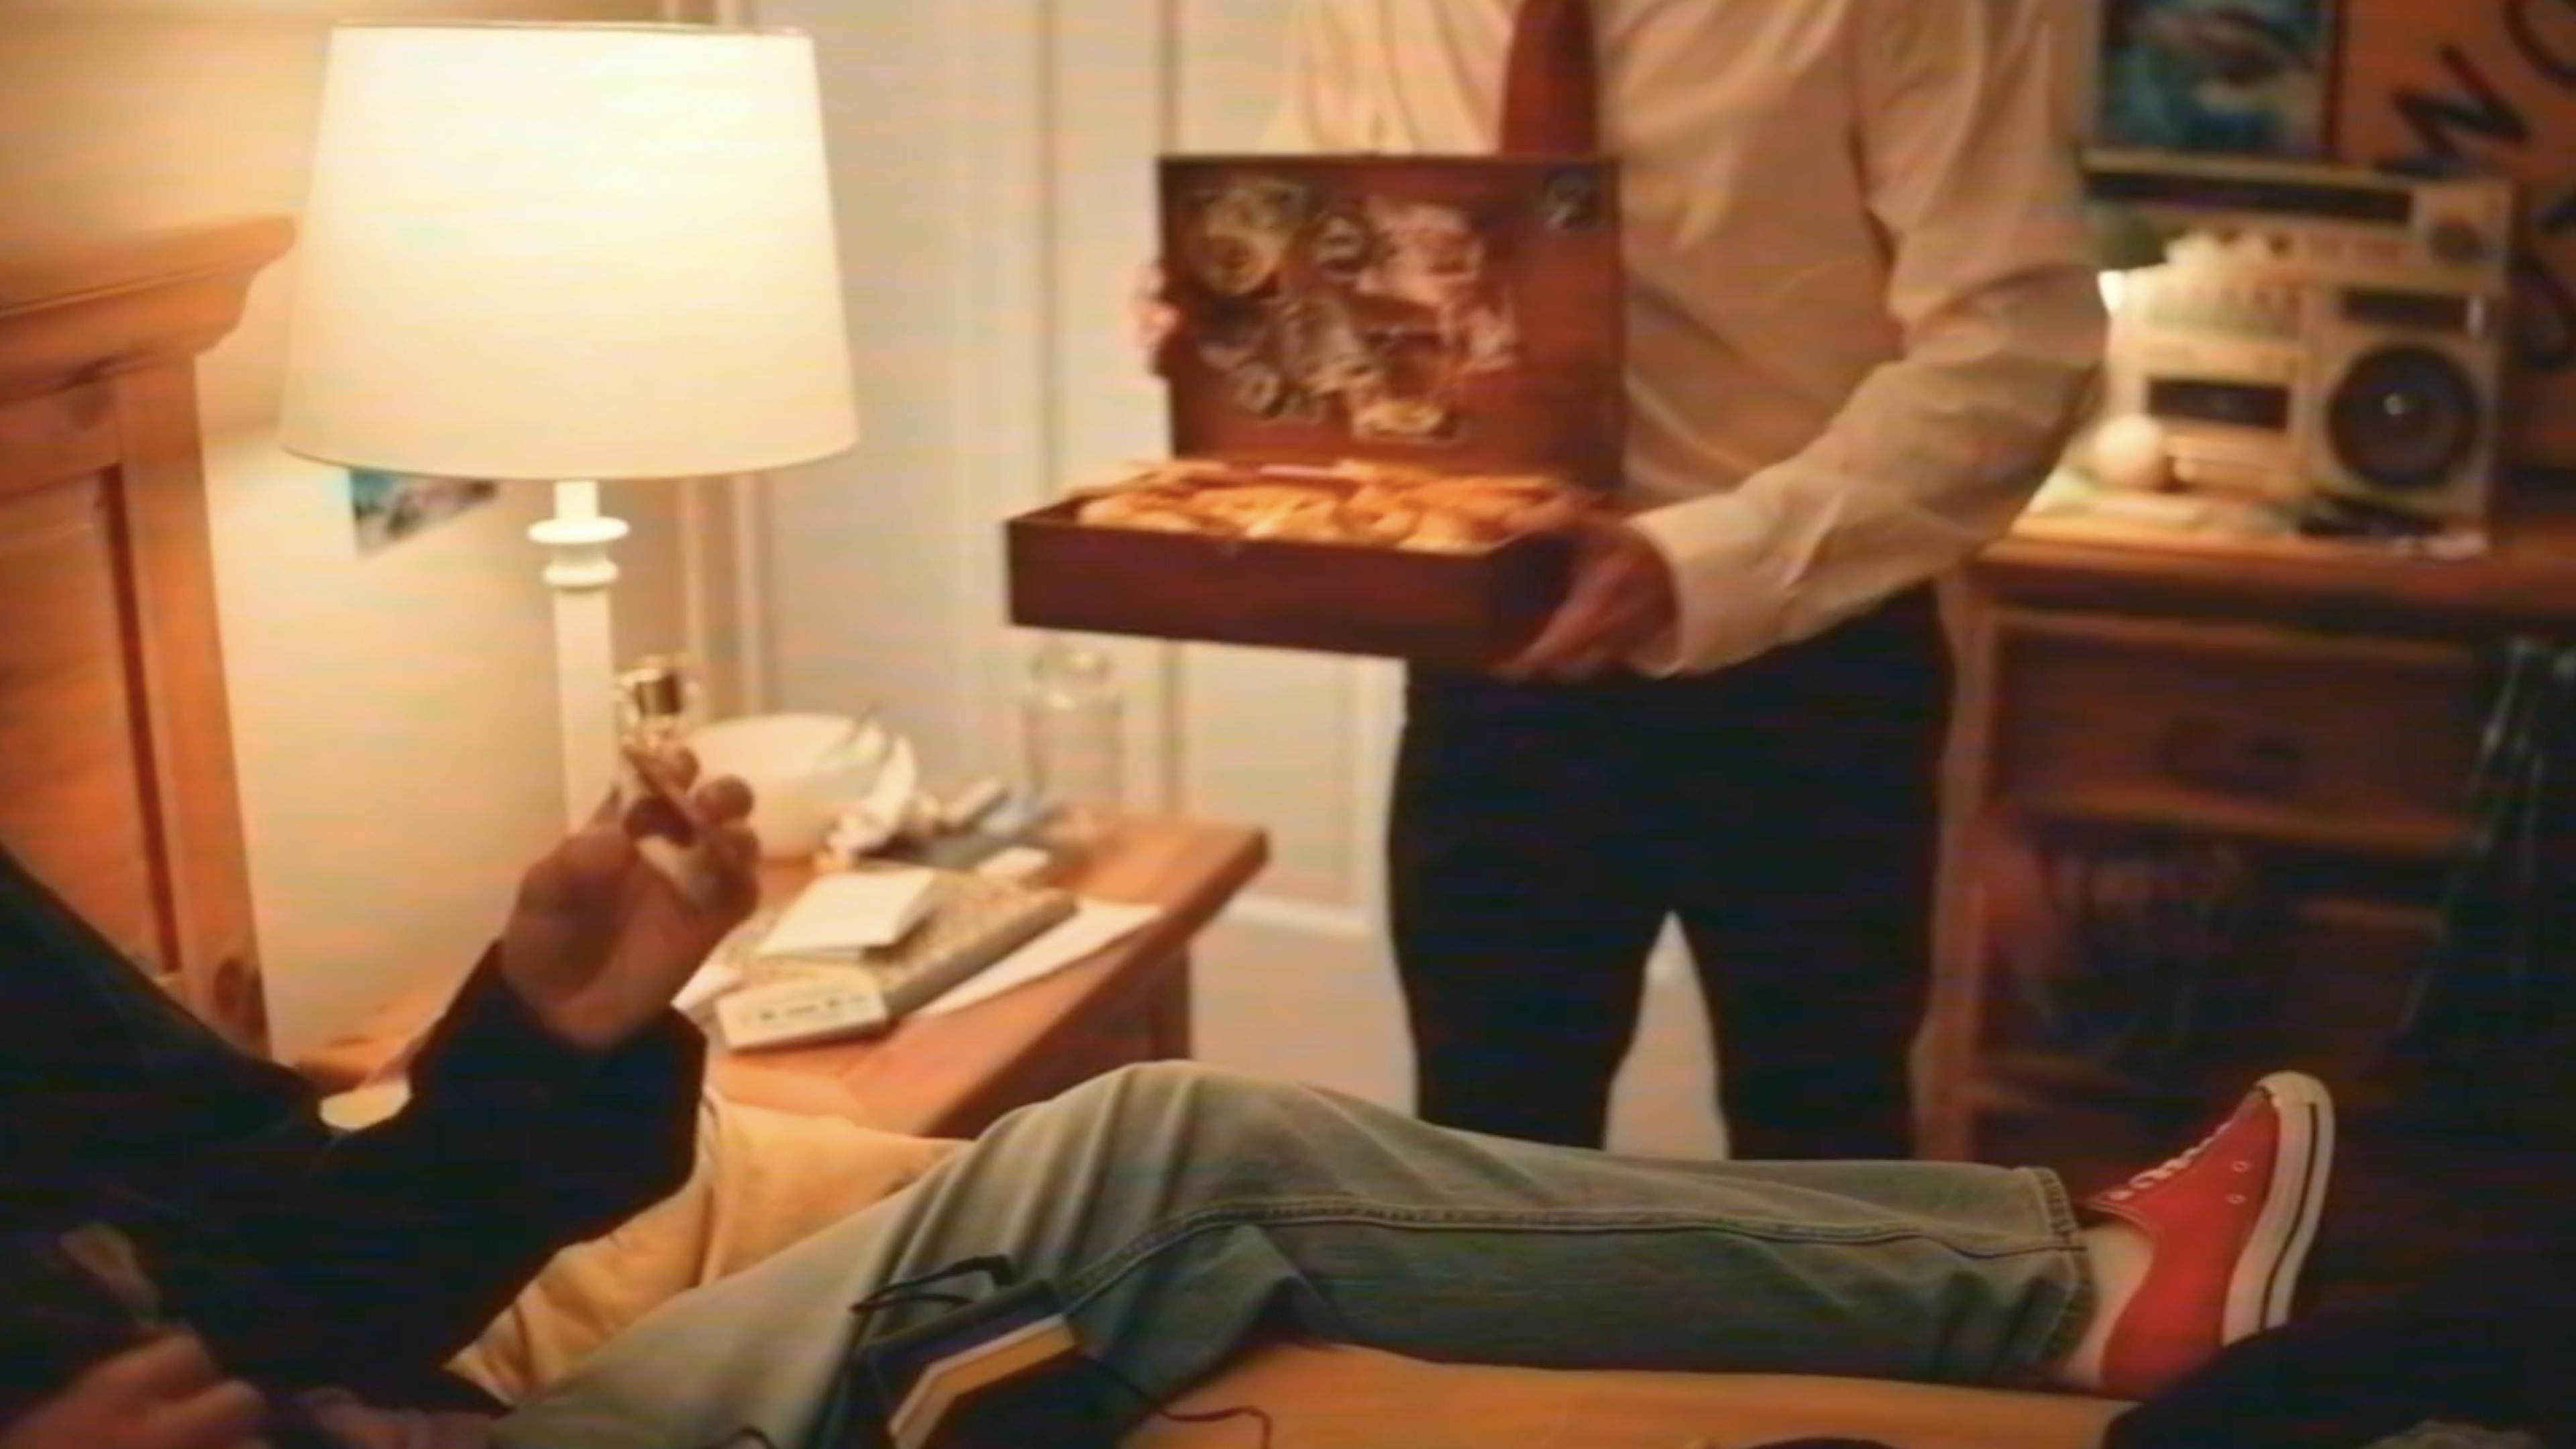 A man in a suit brings a box of food to someone laying in bed